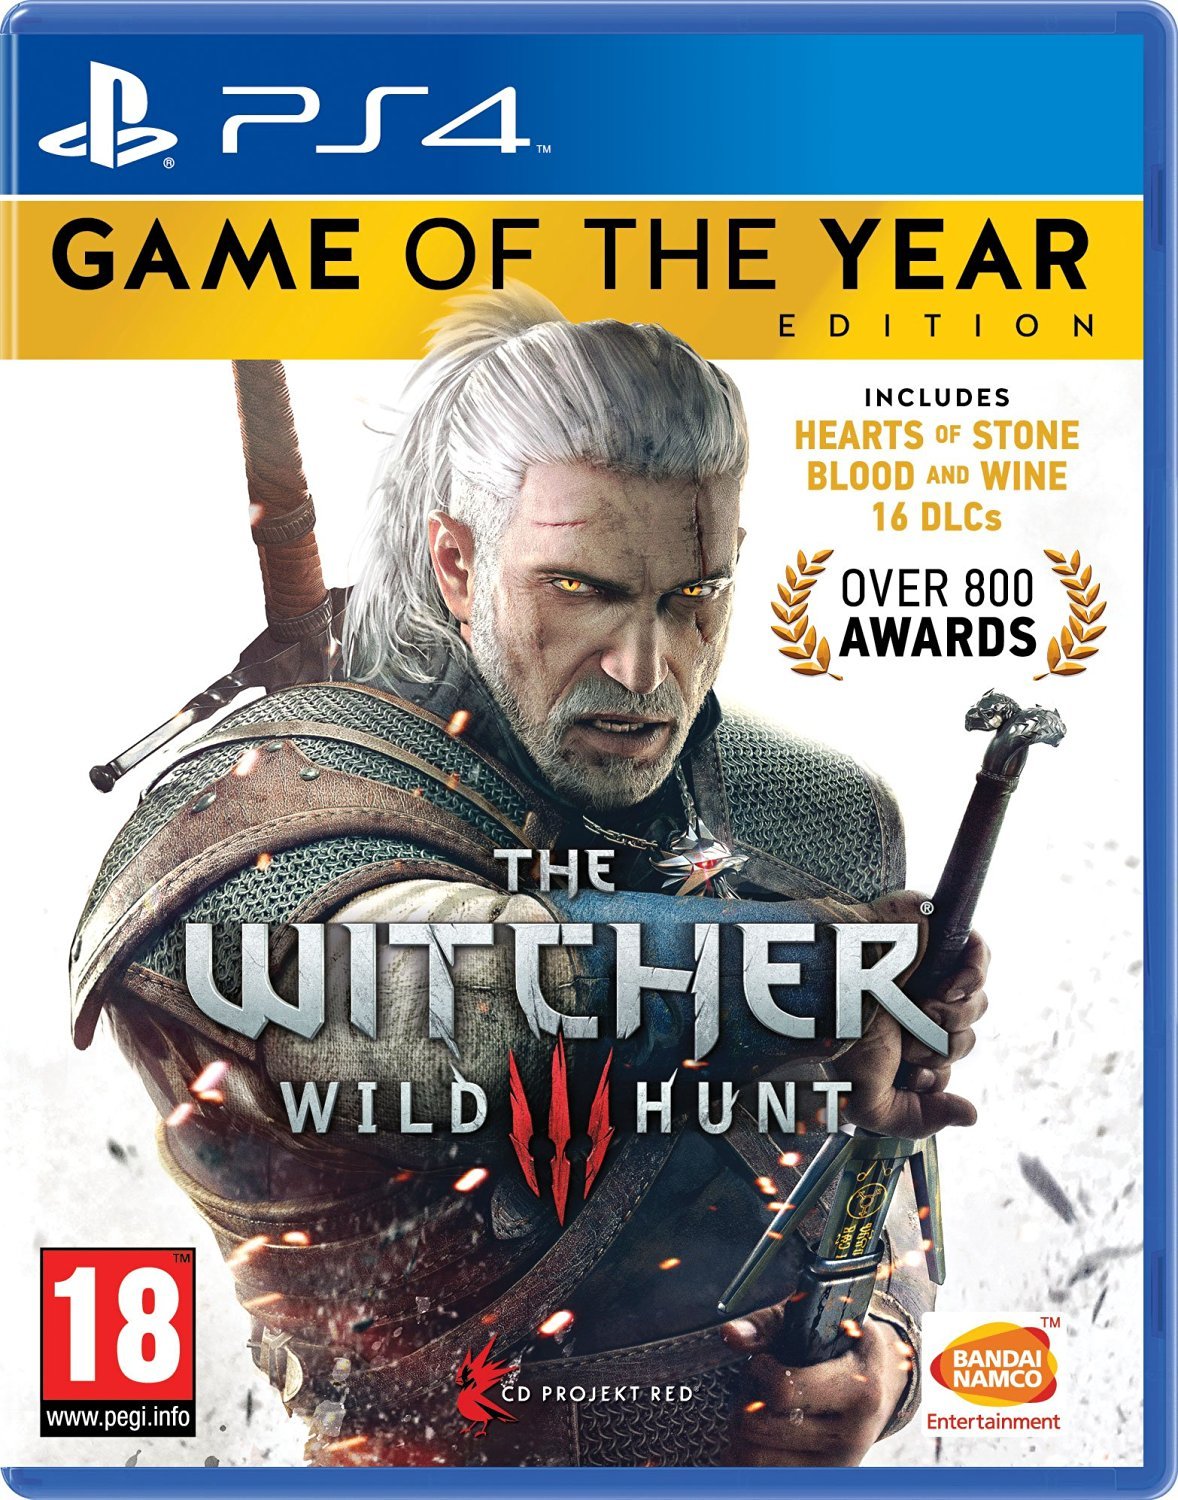 Buy The Witcher III (3): Wild Hunt (Game of The Year Edition